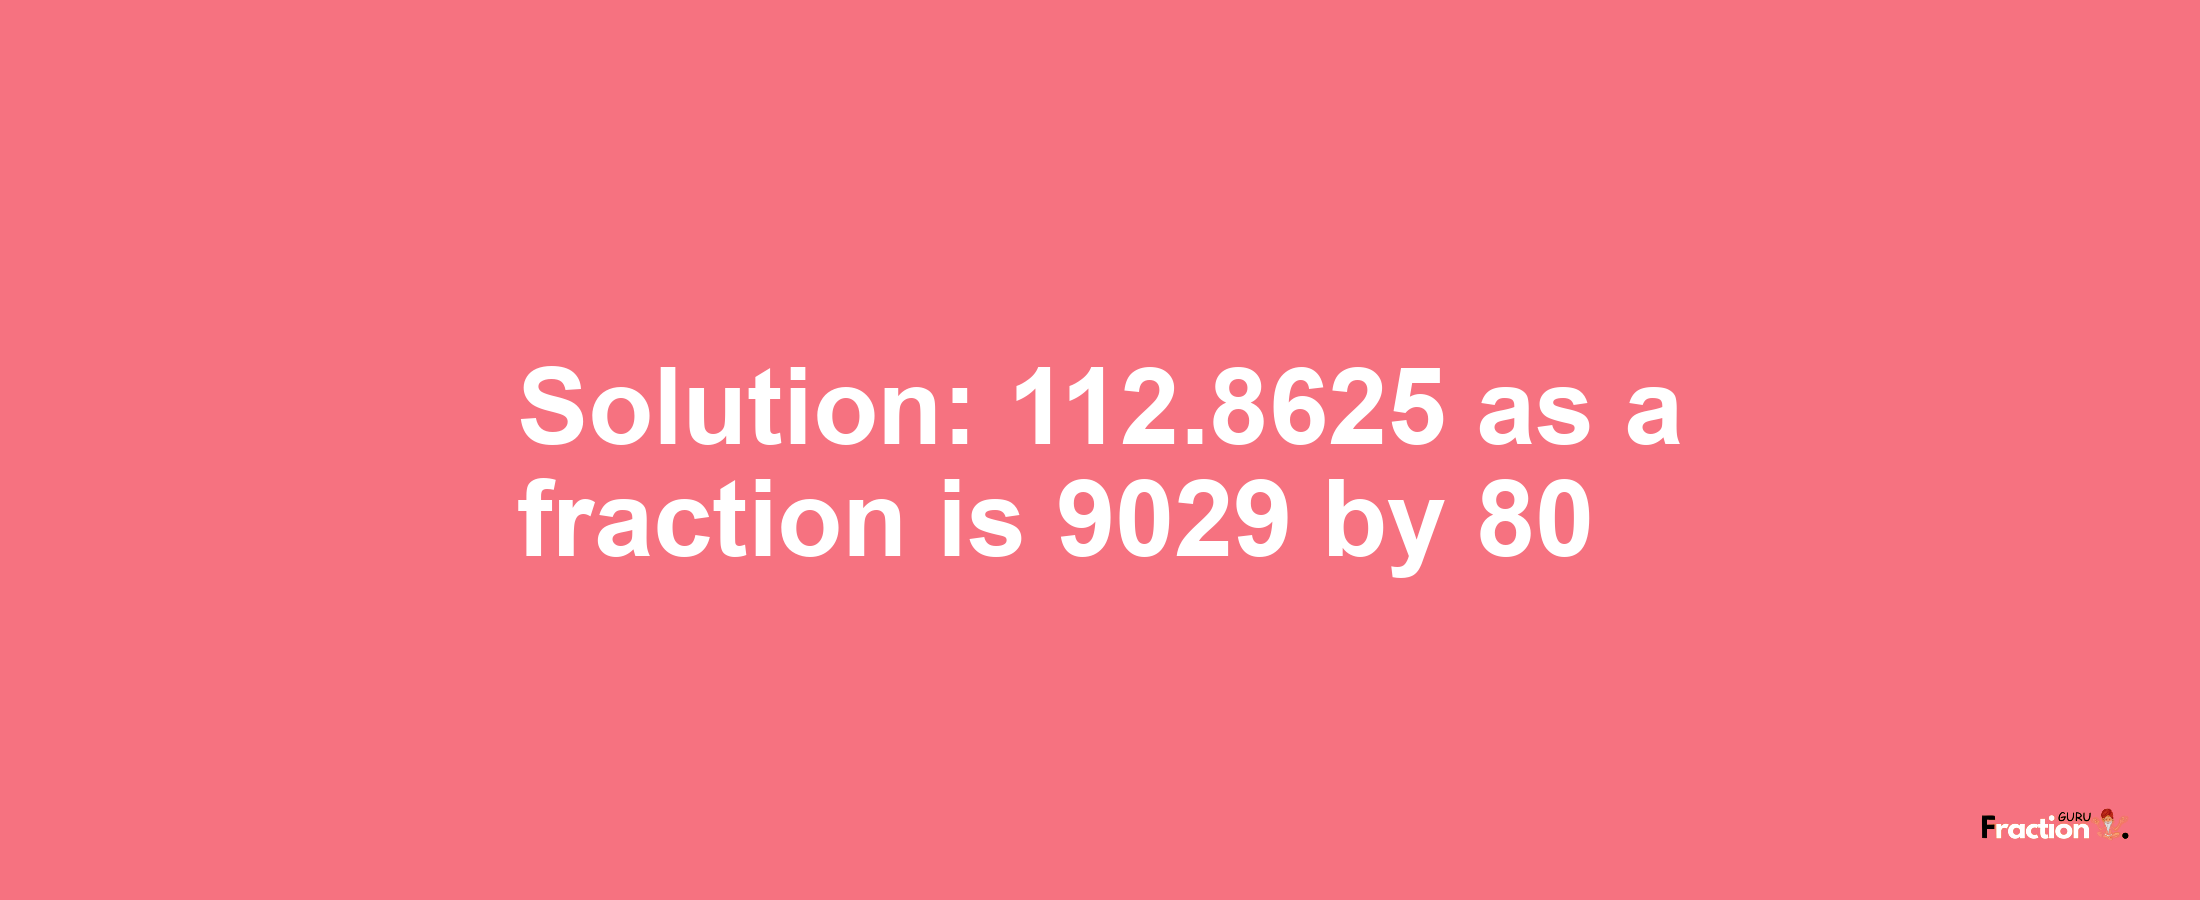 Solution:112.8625 as a fraction is 9029/80